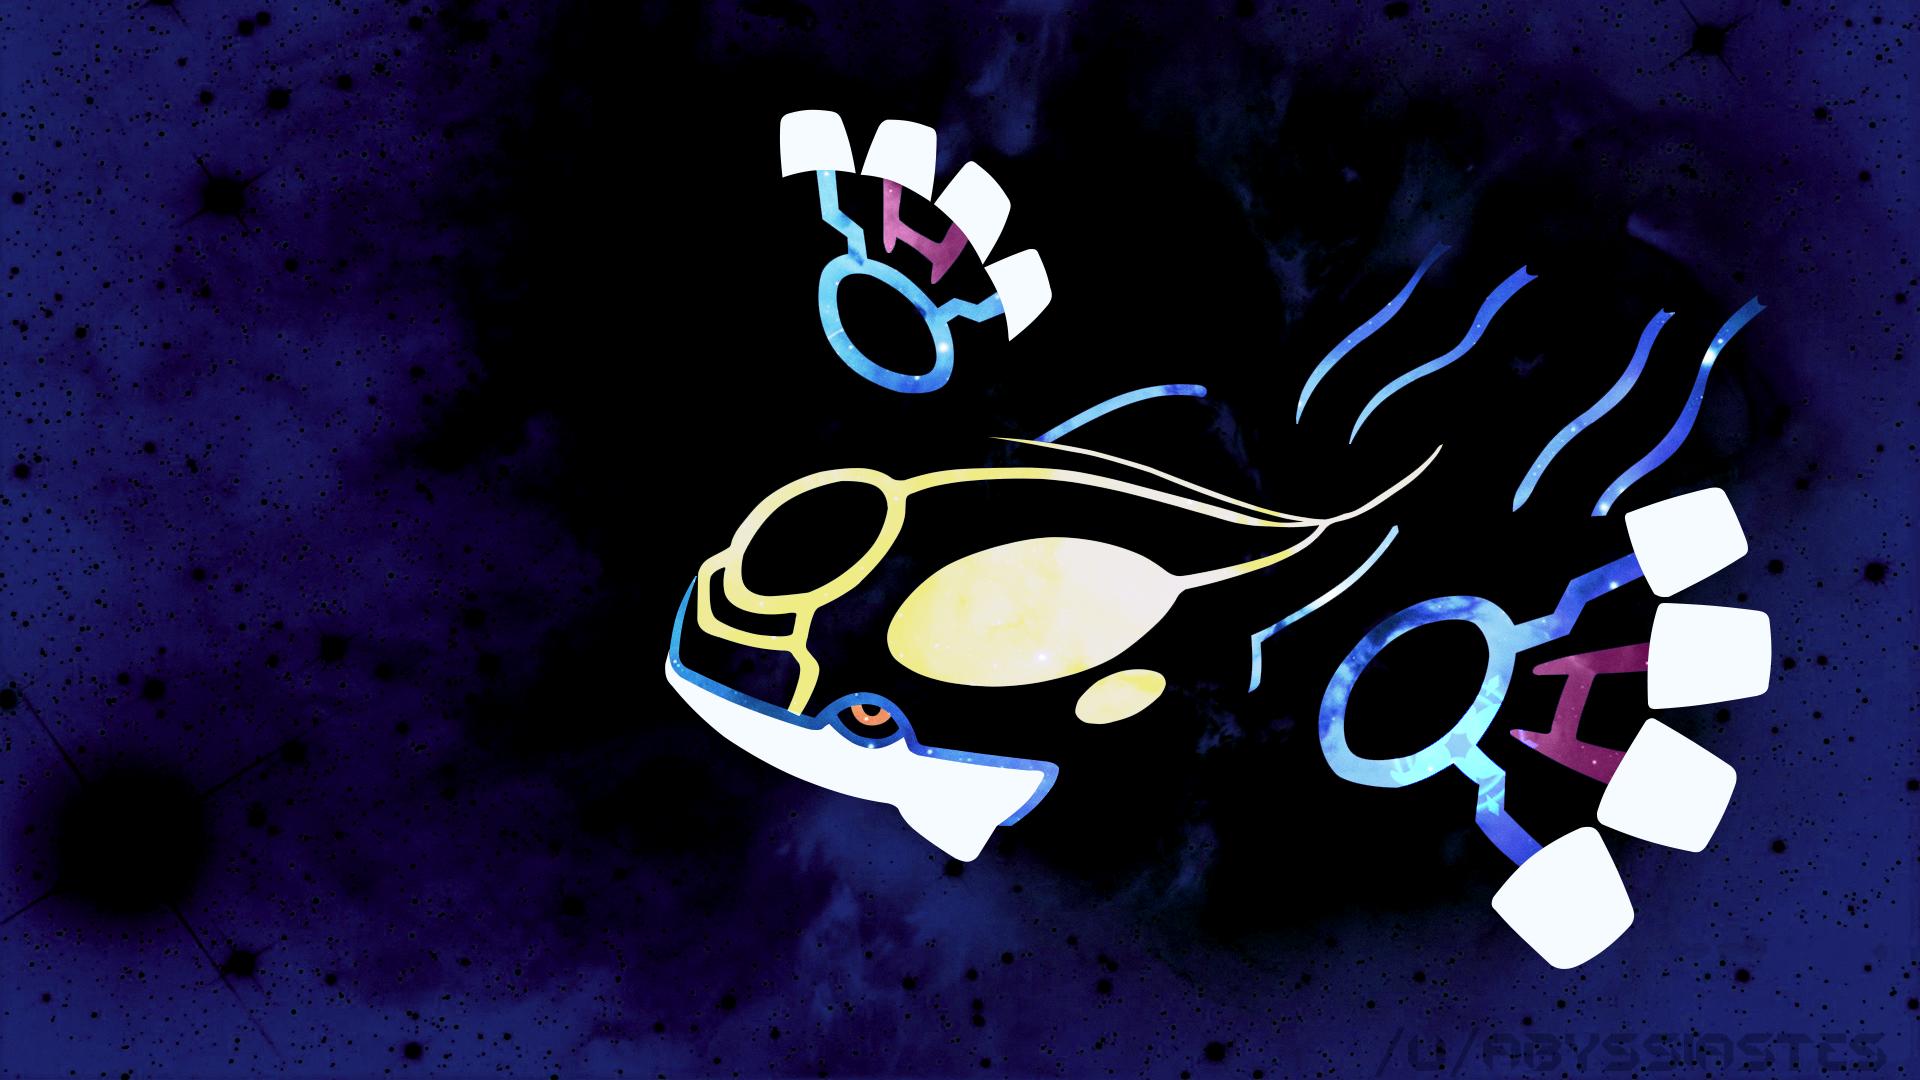 Alpha Kyogre! Spent all of last night working on this wallpaper ...